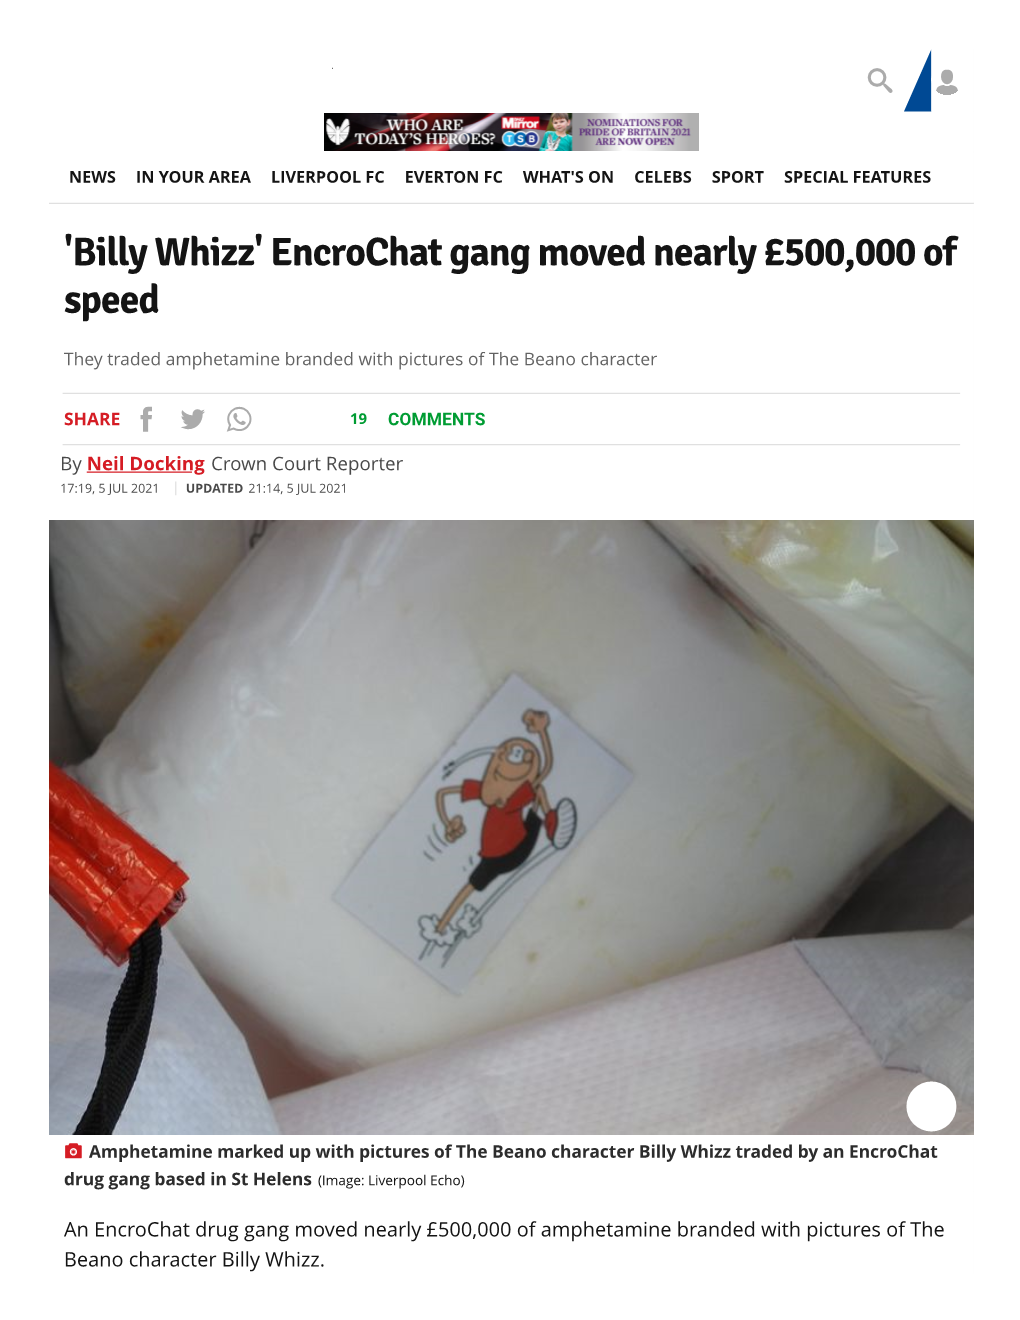 Billy Whizz' Encrochat Gang Moved Nearly £500,000 of Speed